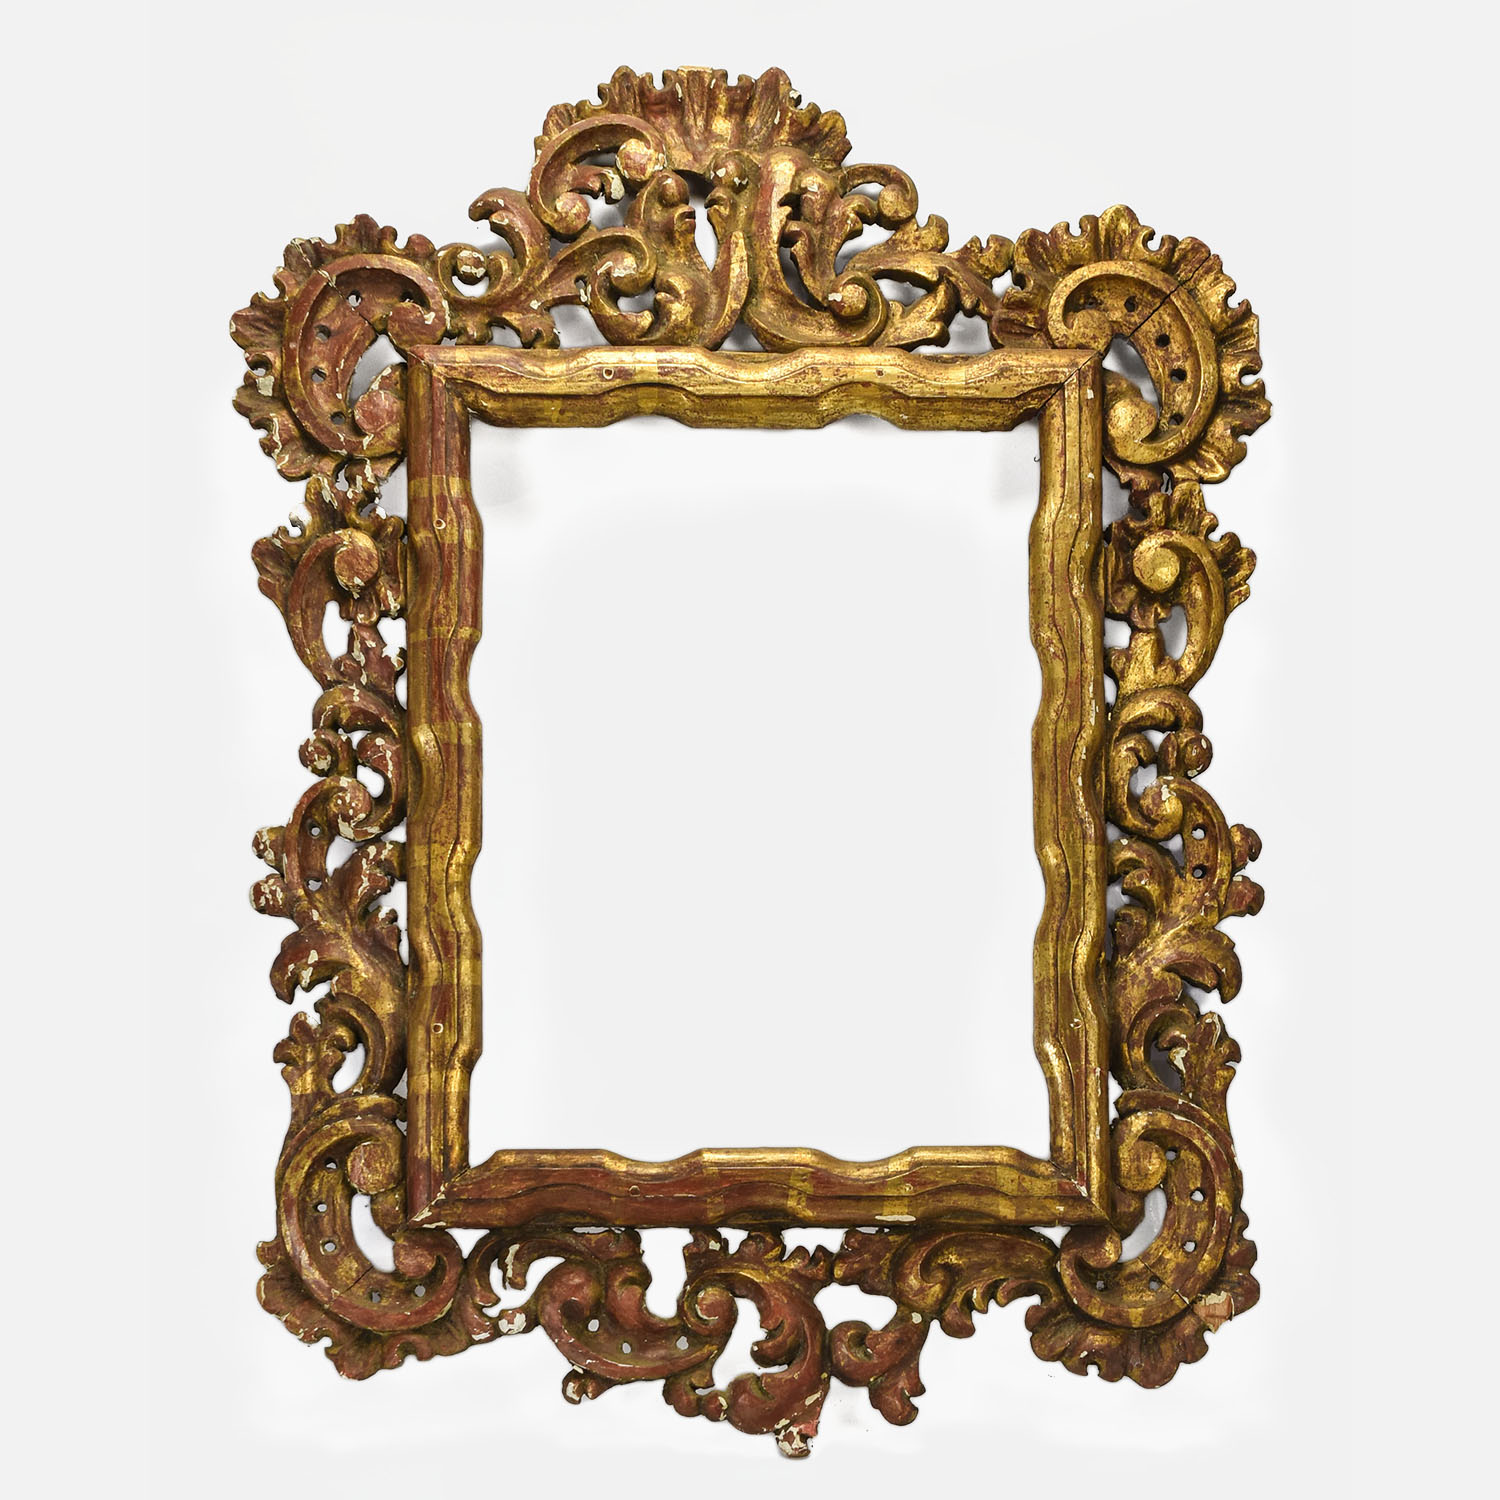 Antique 19thC Italian Carved Giltwood Baroque Frame